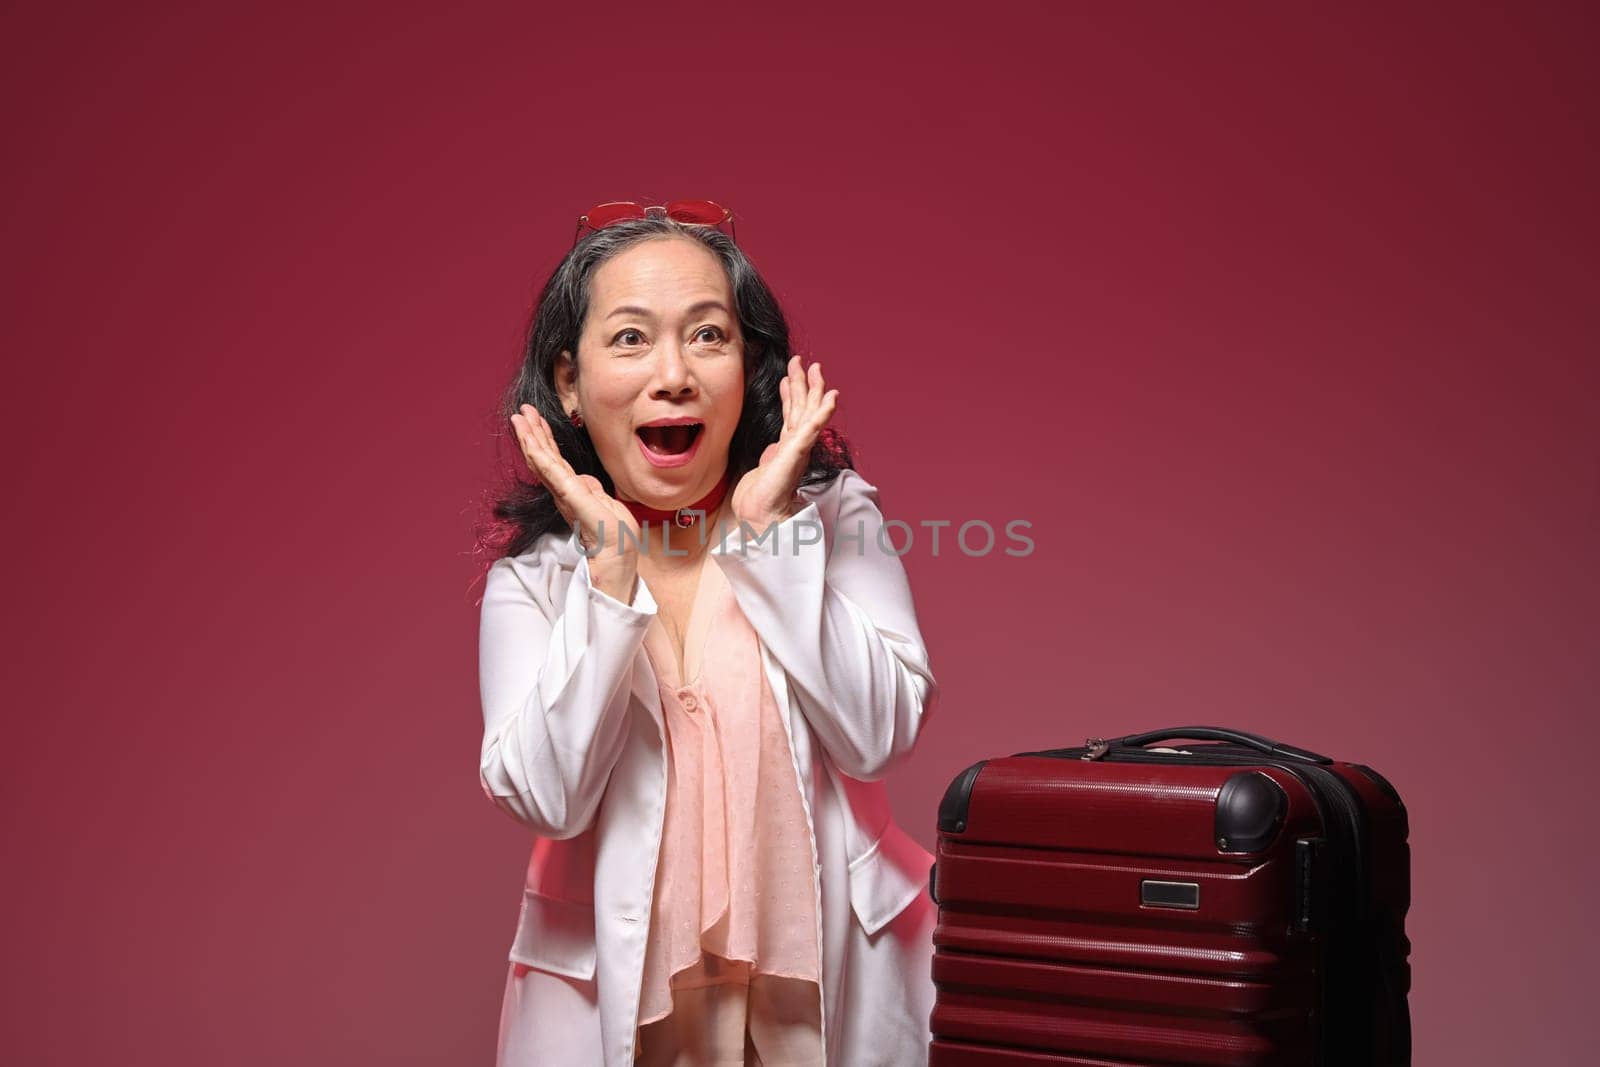 Happy and excited senior woman with suitcase over red background. Summer, travel and vacation concept.